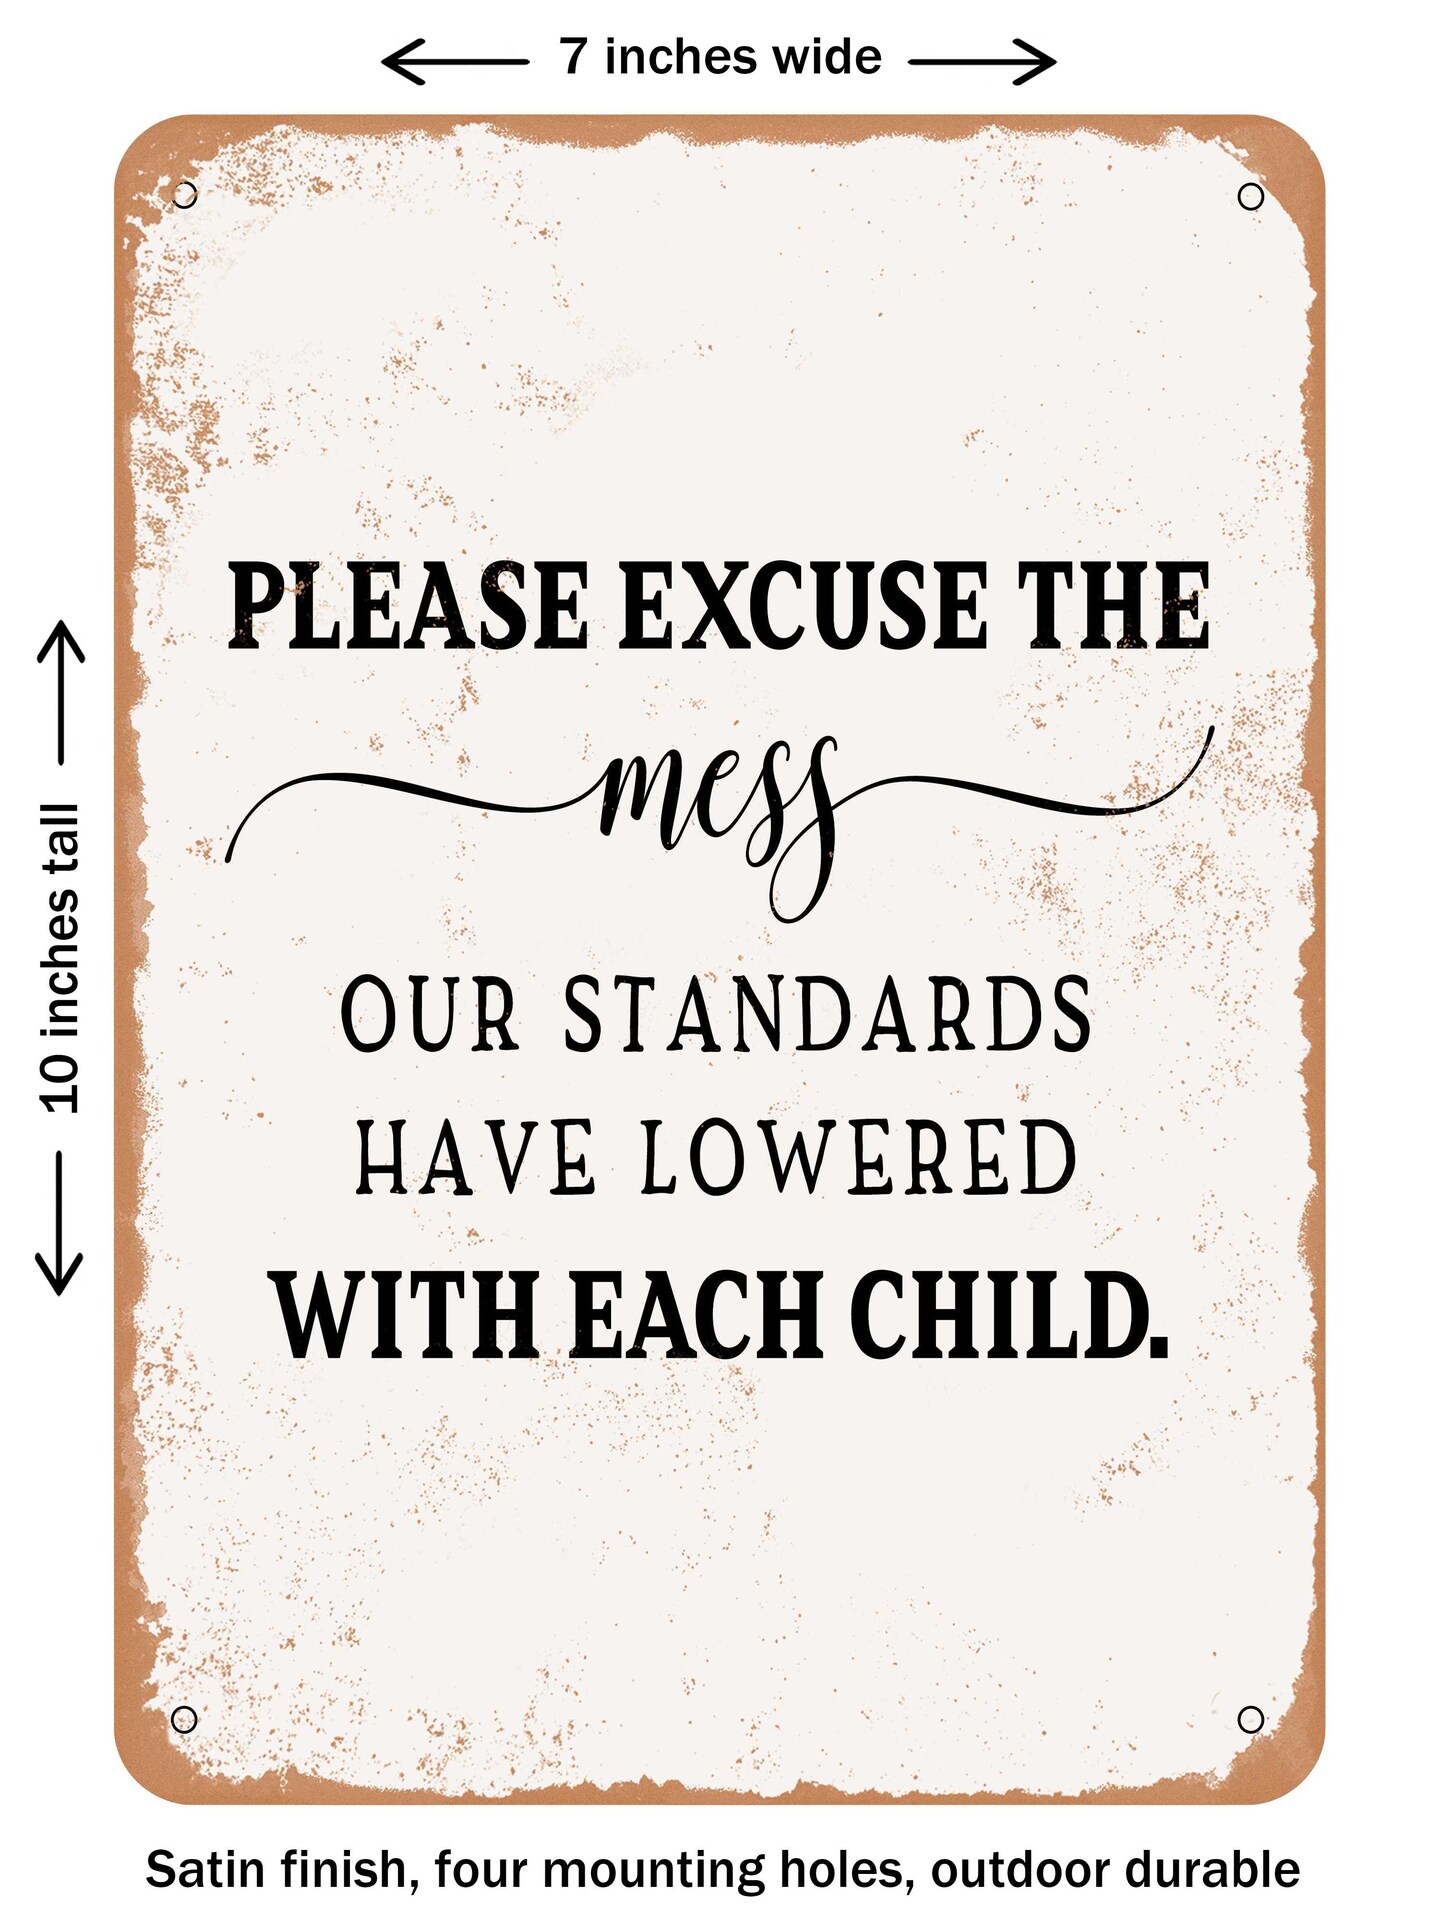 DECORATIVE METAL SIGN - Please Excuse the Mess Child  - Vintage Rusty Look